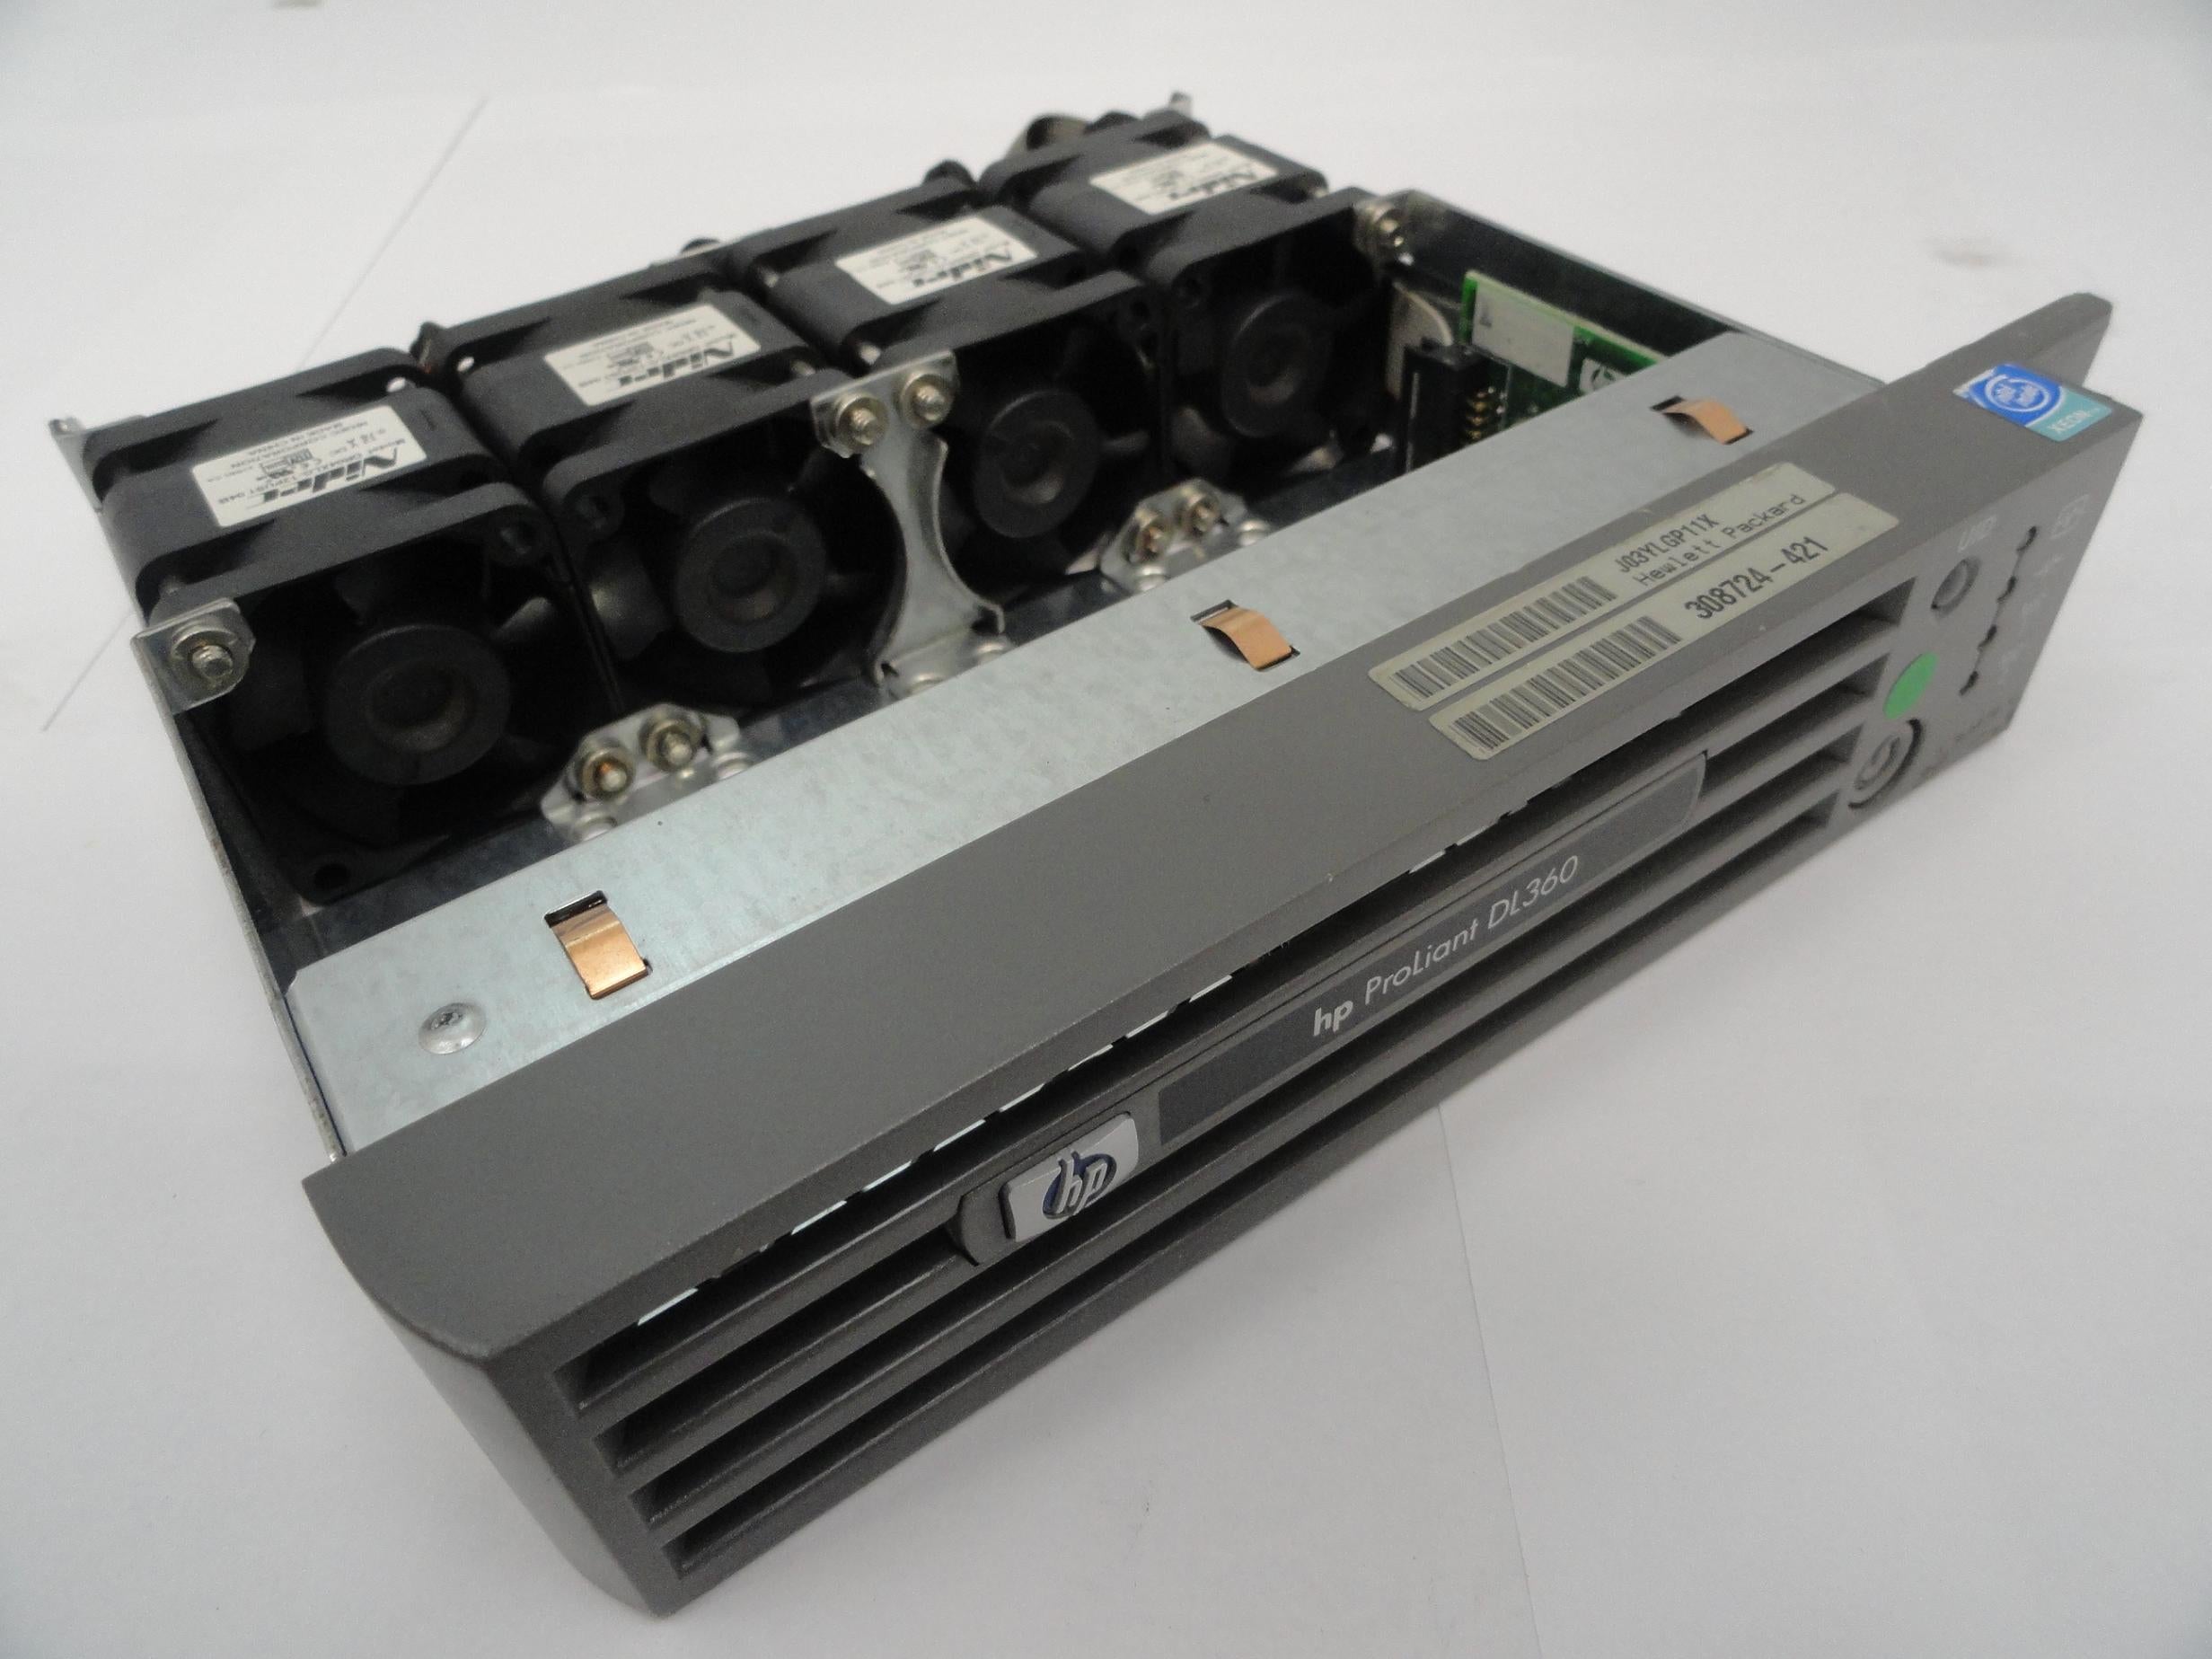 PR17017_305449-001_HP Front Fan Tray and Power Button Assembly - Image3